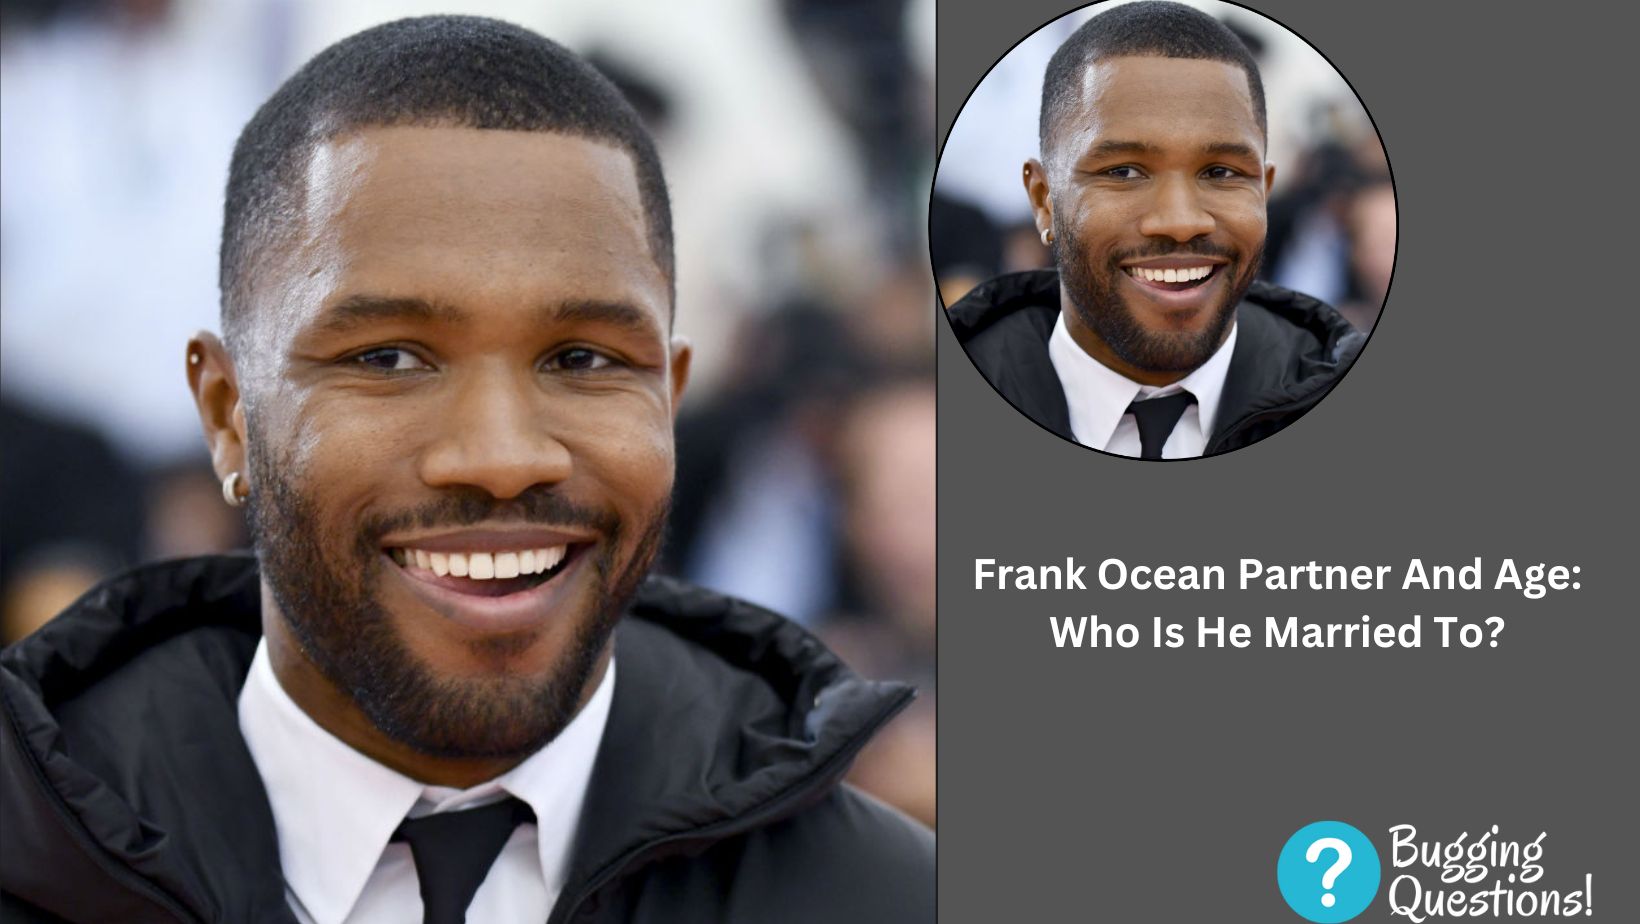 Frank Ocean Partner And Age: Who Is He Married To?